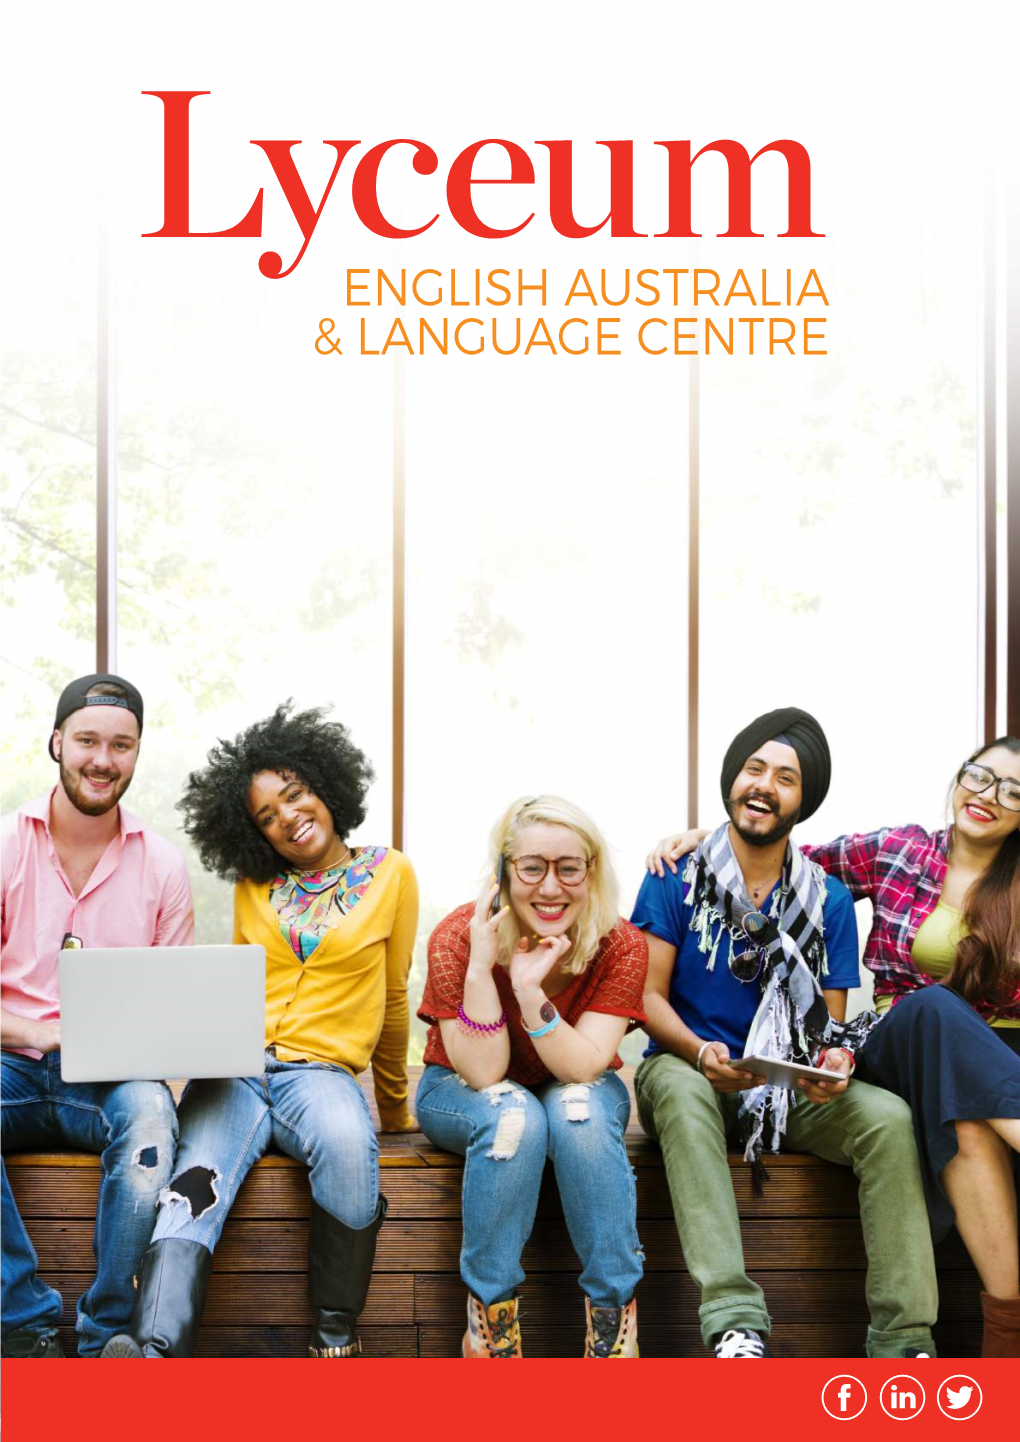 +61 3 9600 1194 | Welcome to Lyceum English Australia & Language Centre